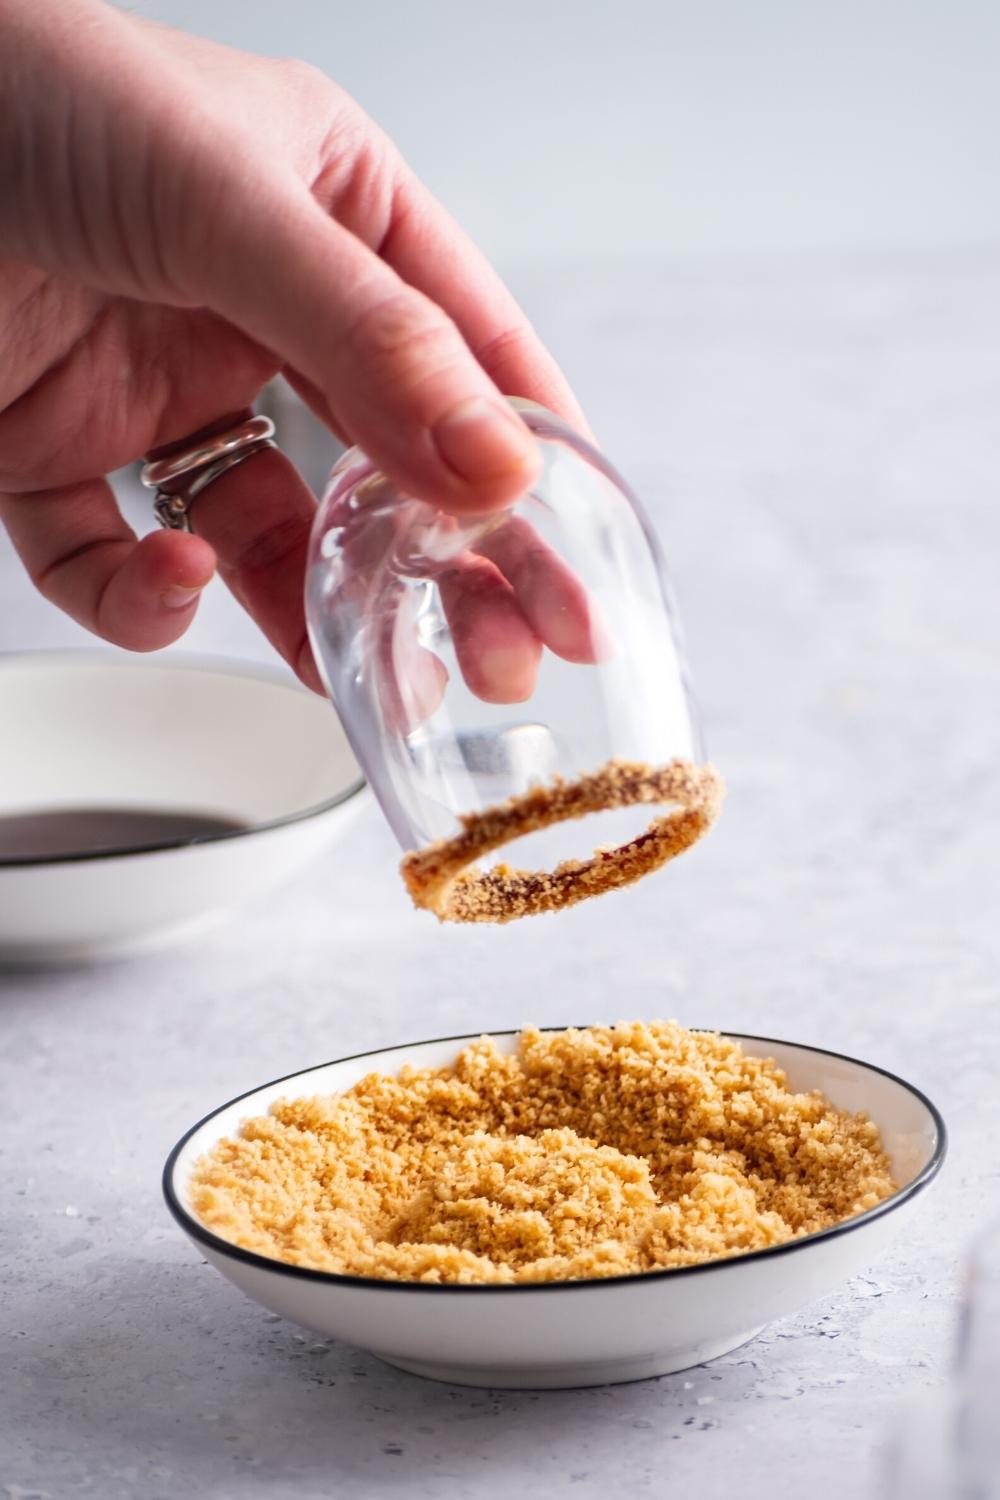 A hand holding a shot glass upside down with crushed up graham crackers on the rim of it. The shot glass is being held above a bowl that is filled with the crushed up graham crackers.